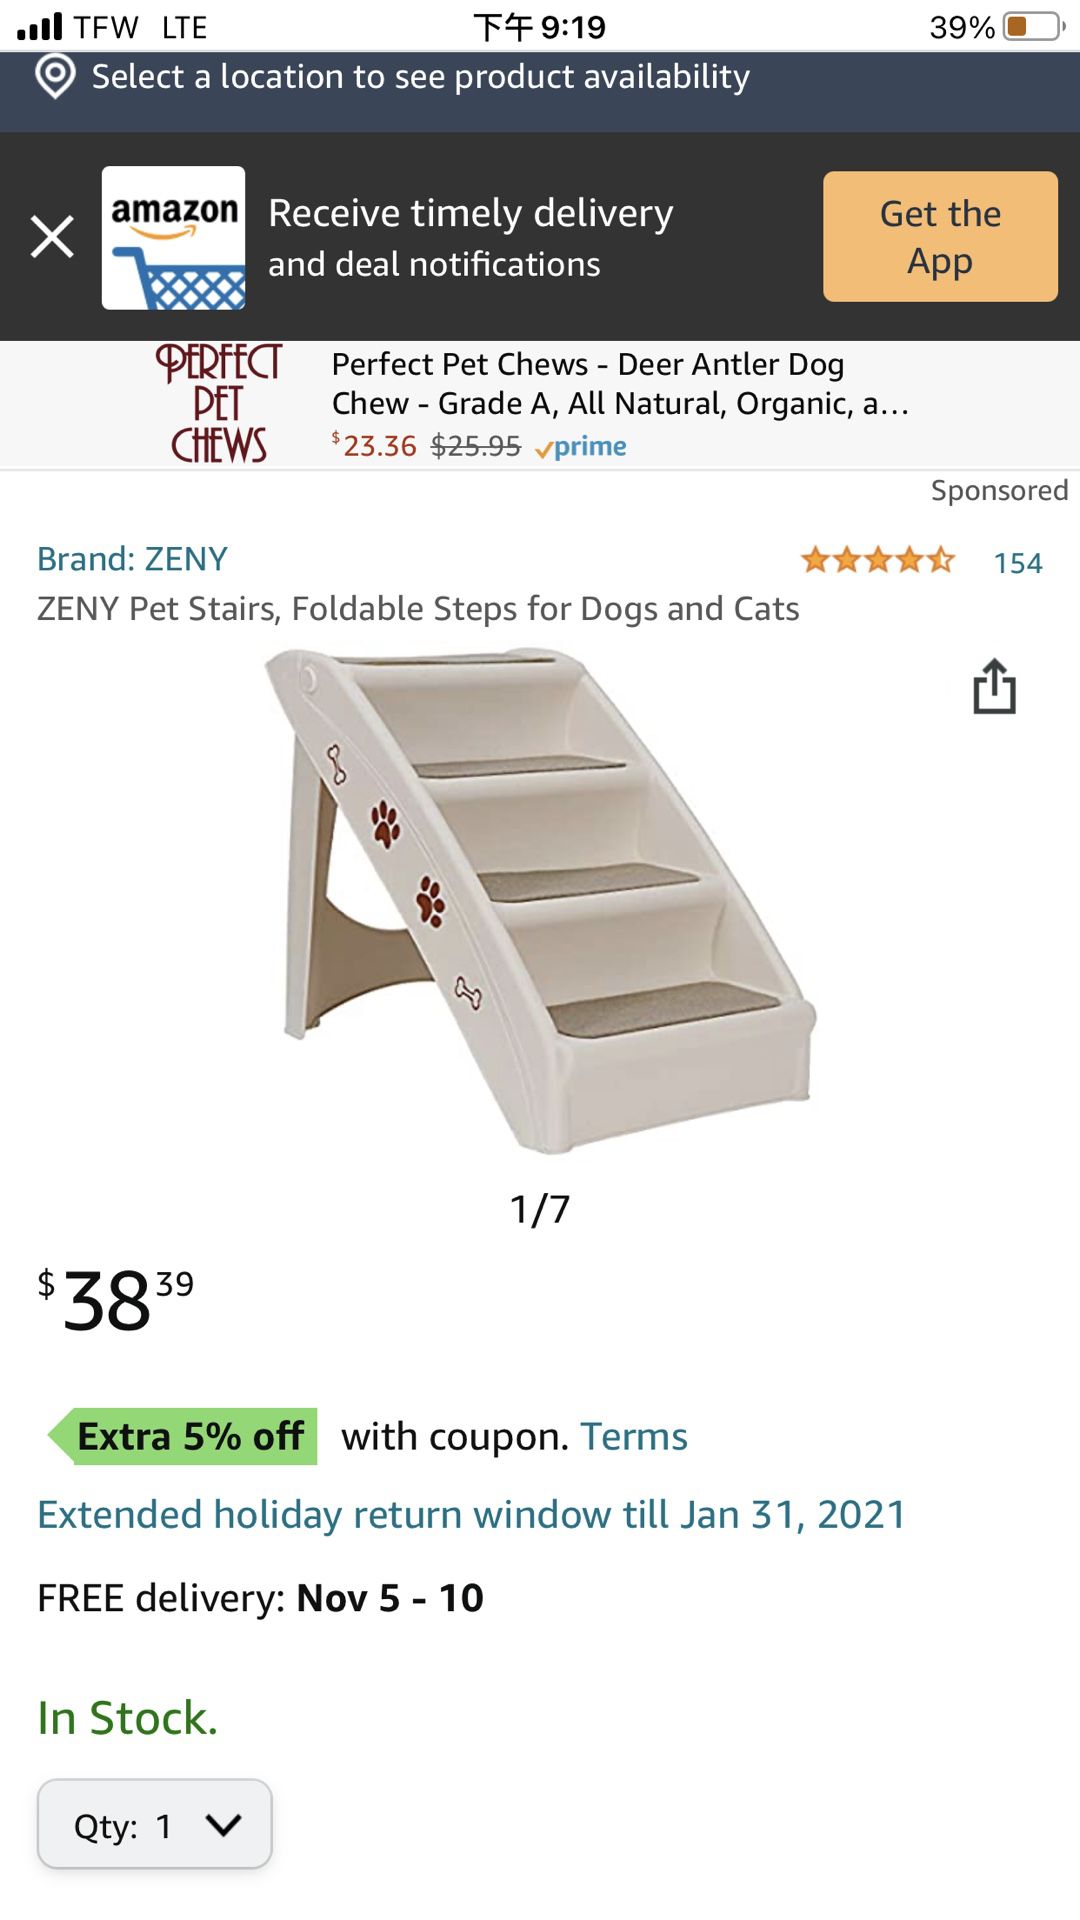 ZENY Pet Stairs, Foldable Steps for Dogs and Cats